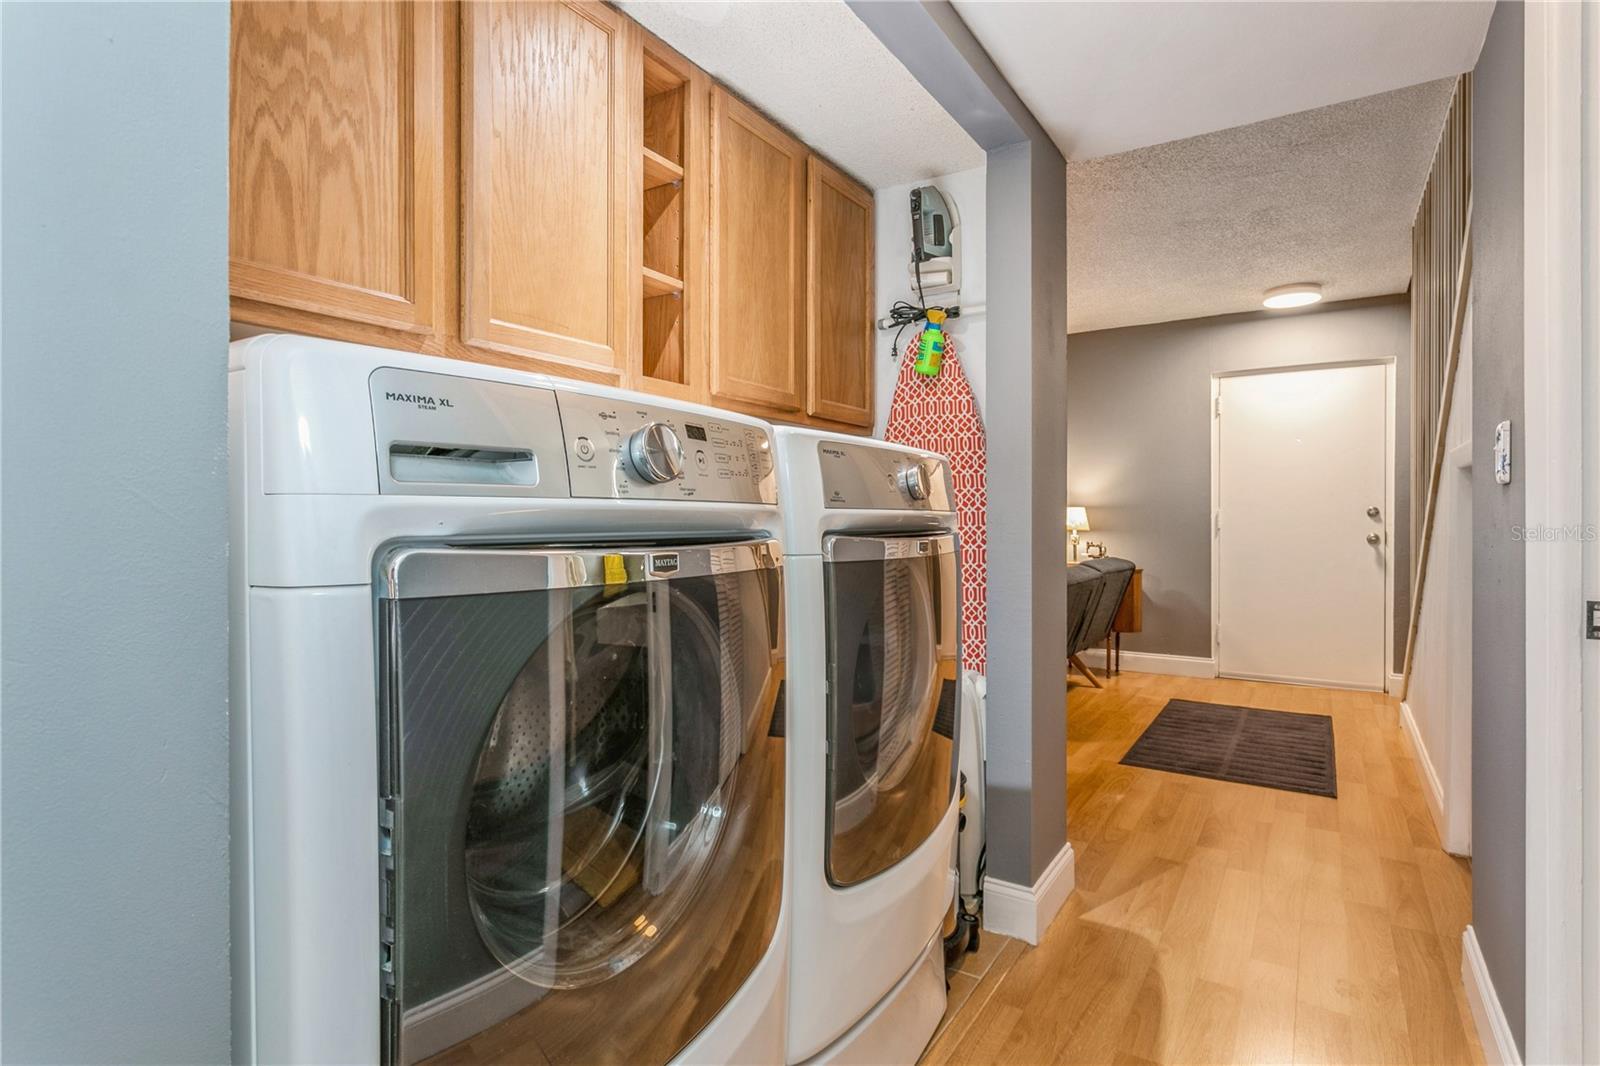 Washer & Dryer with cabinets & Shelf